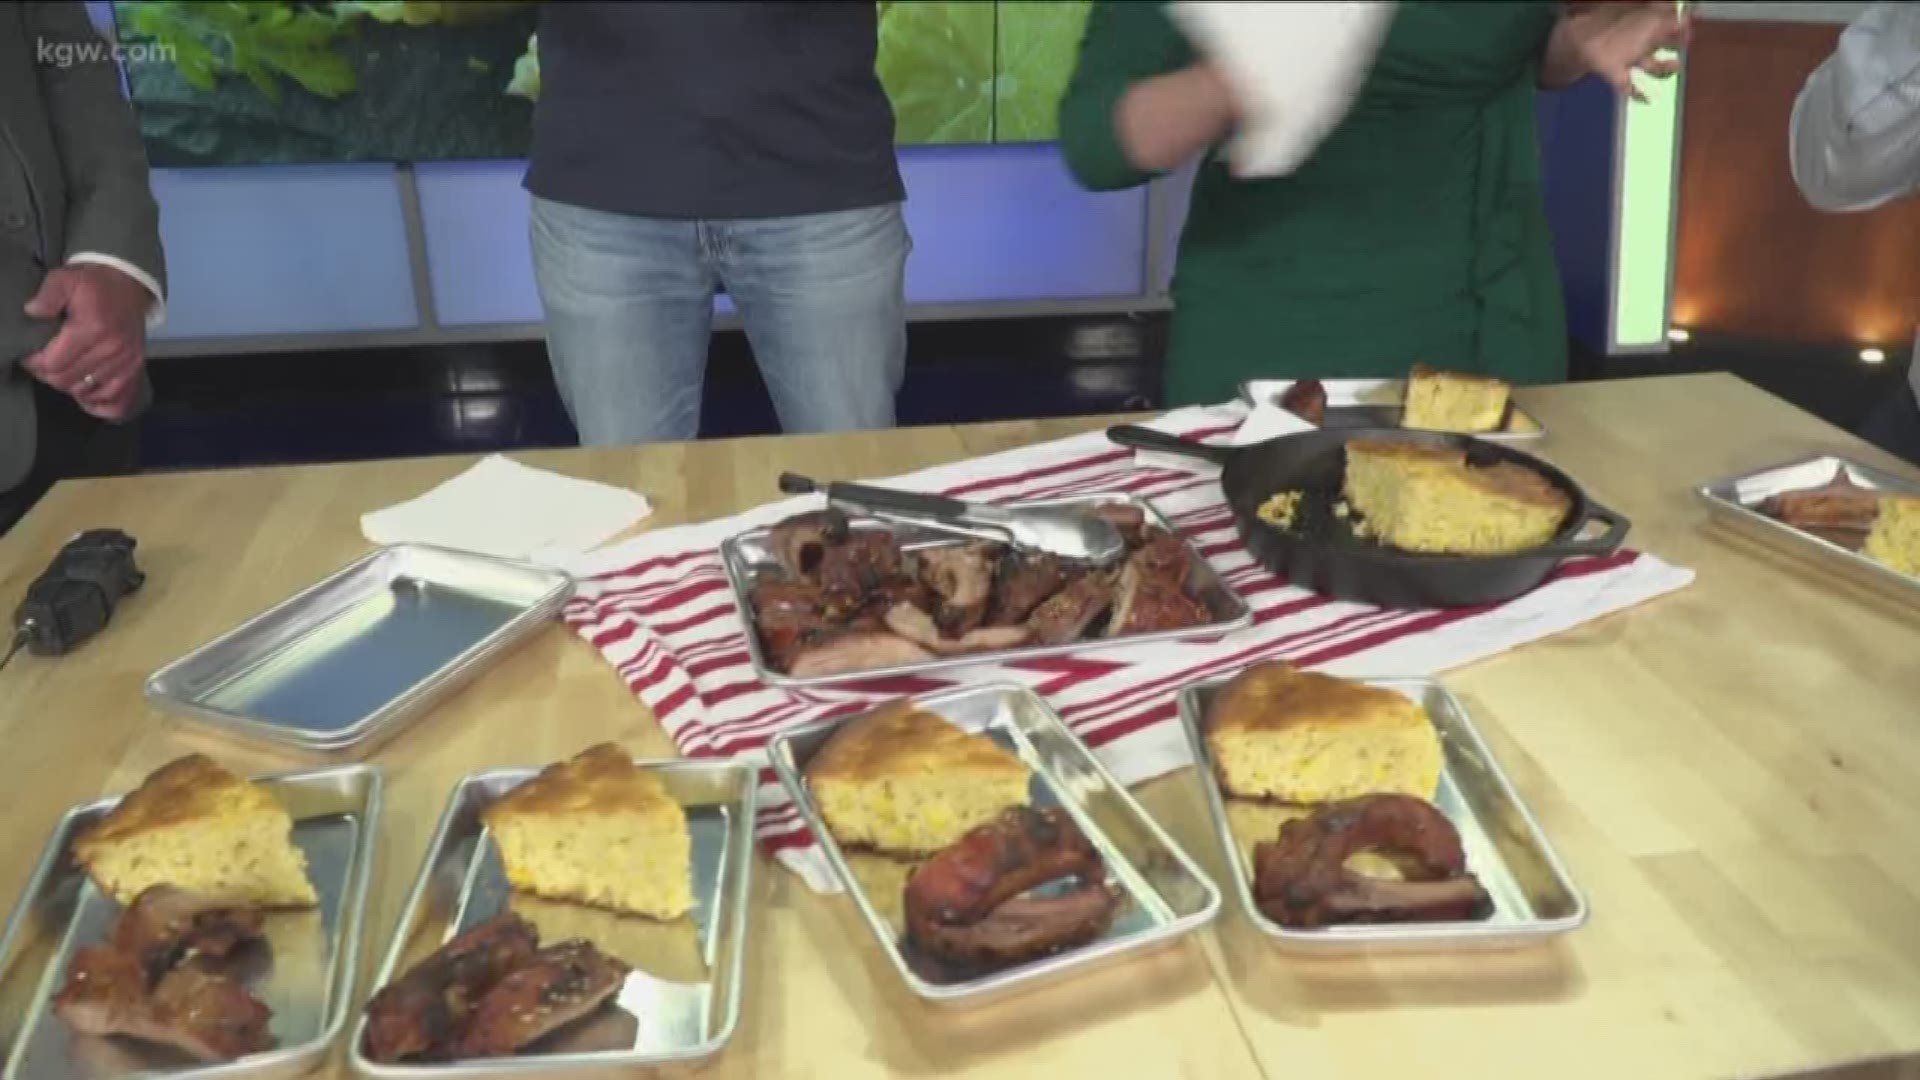 The KGW Sunrise anchors sample Greg Broadwater's asian glazed and grilled ribs, part of the Drew Carney series of favorite summer recipes.